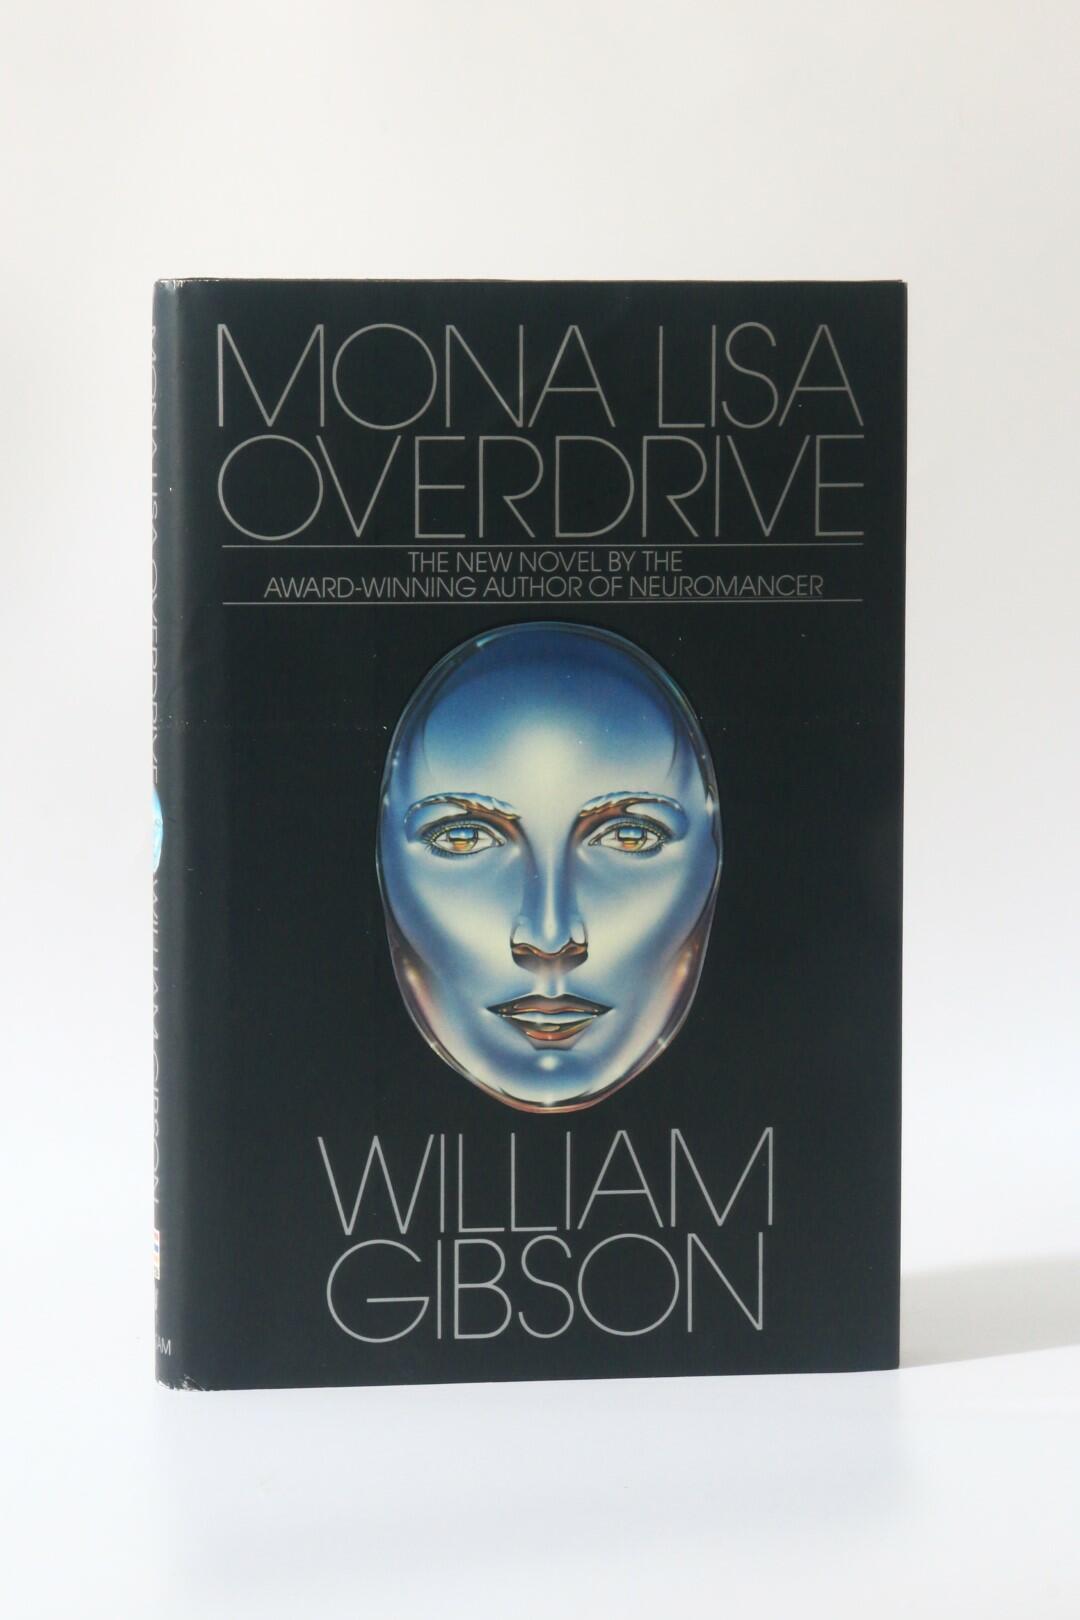 William Gibson - Mona Lisa Overdrive - Bantam, 1988, Signed First Edition.